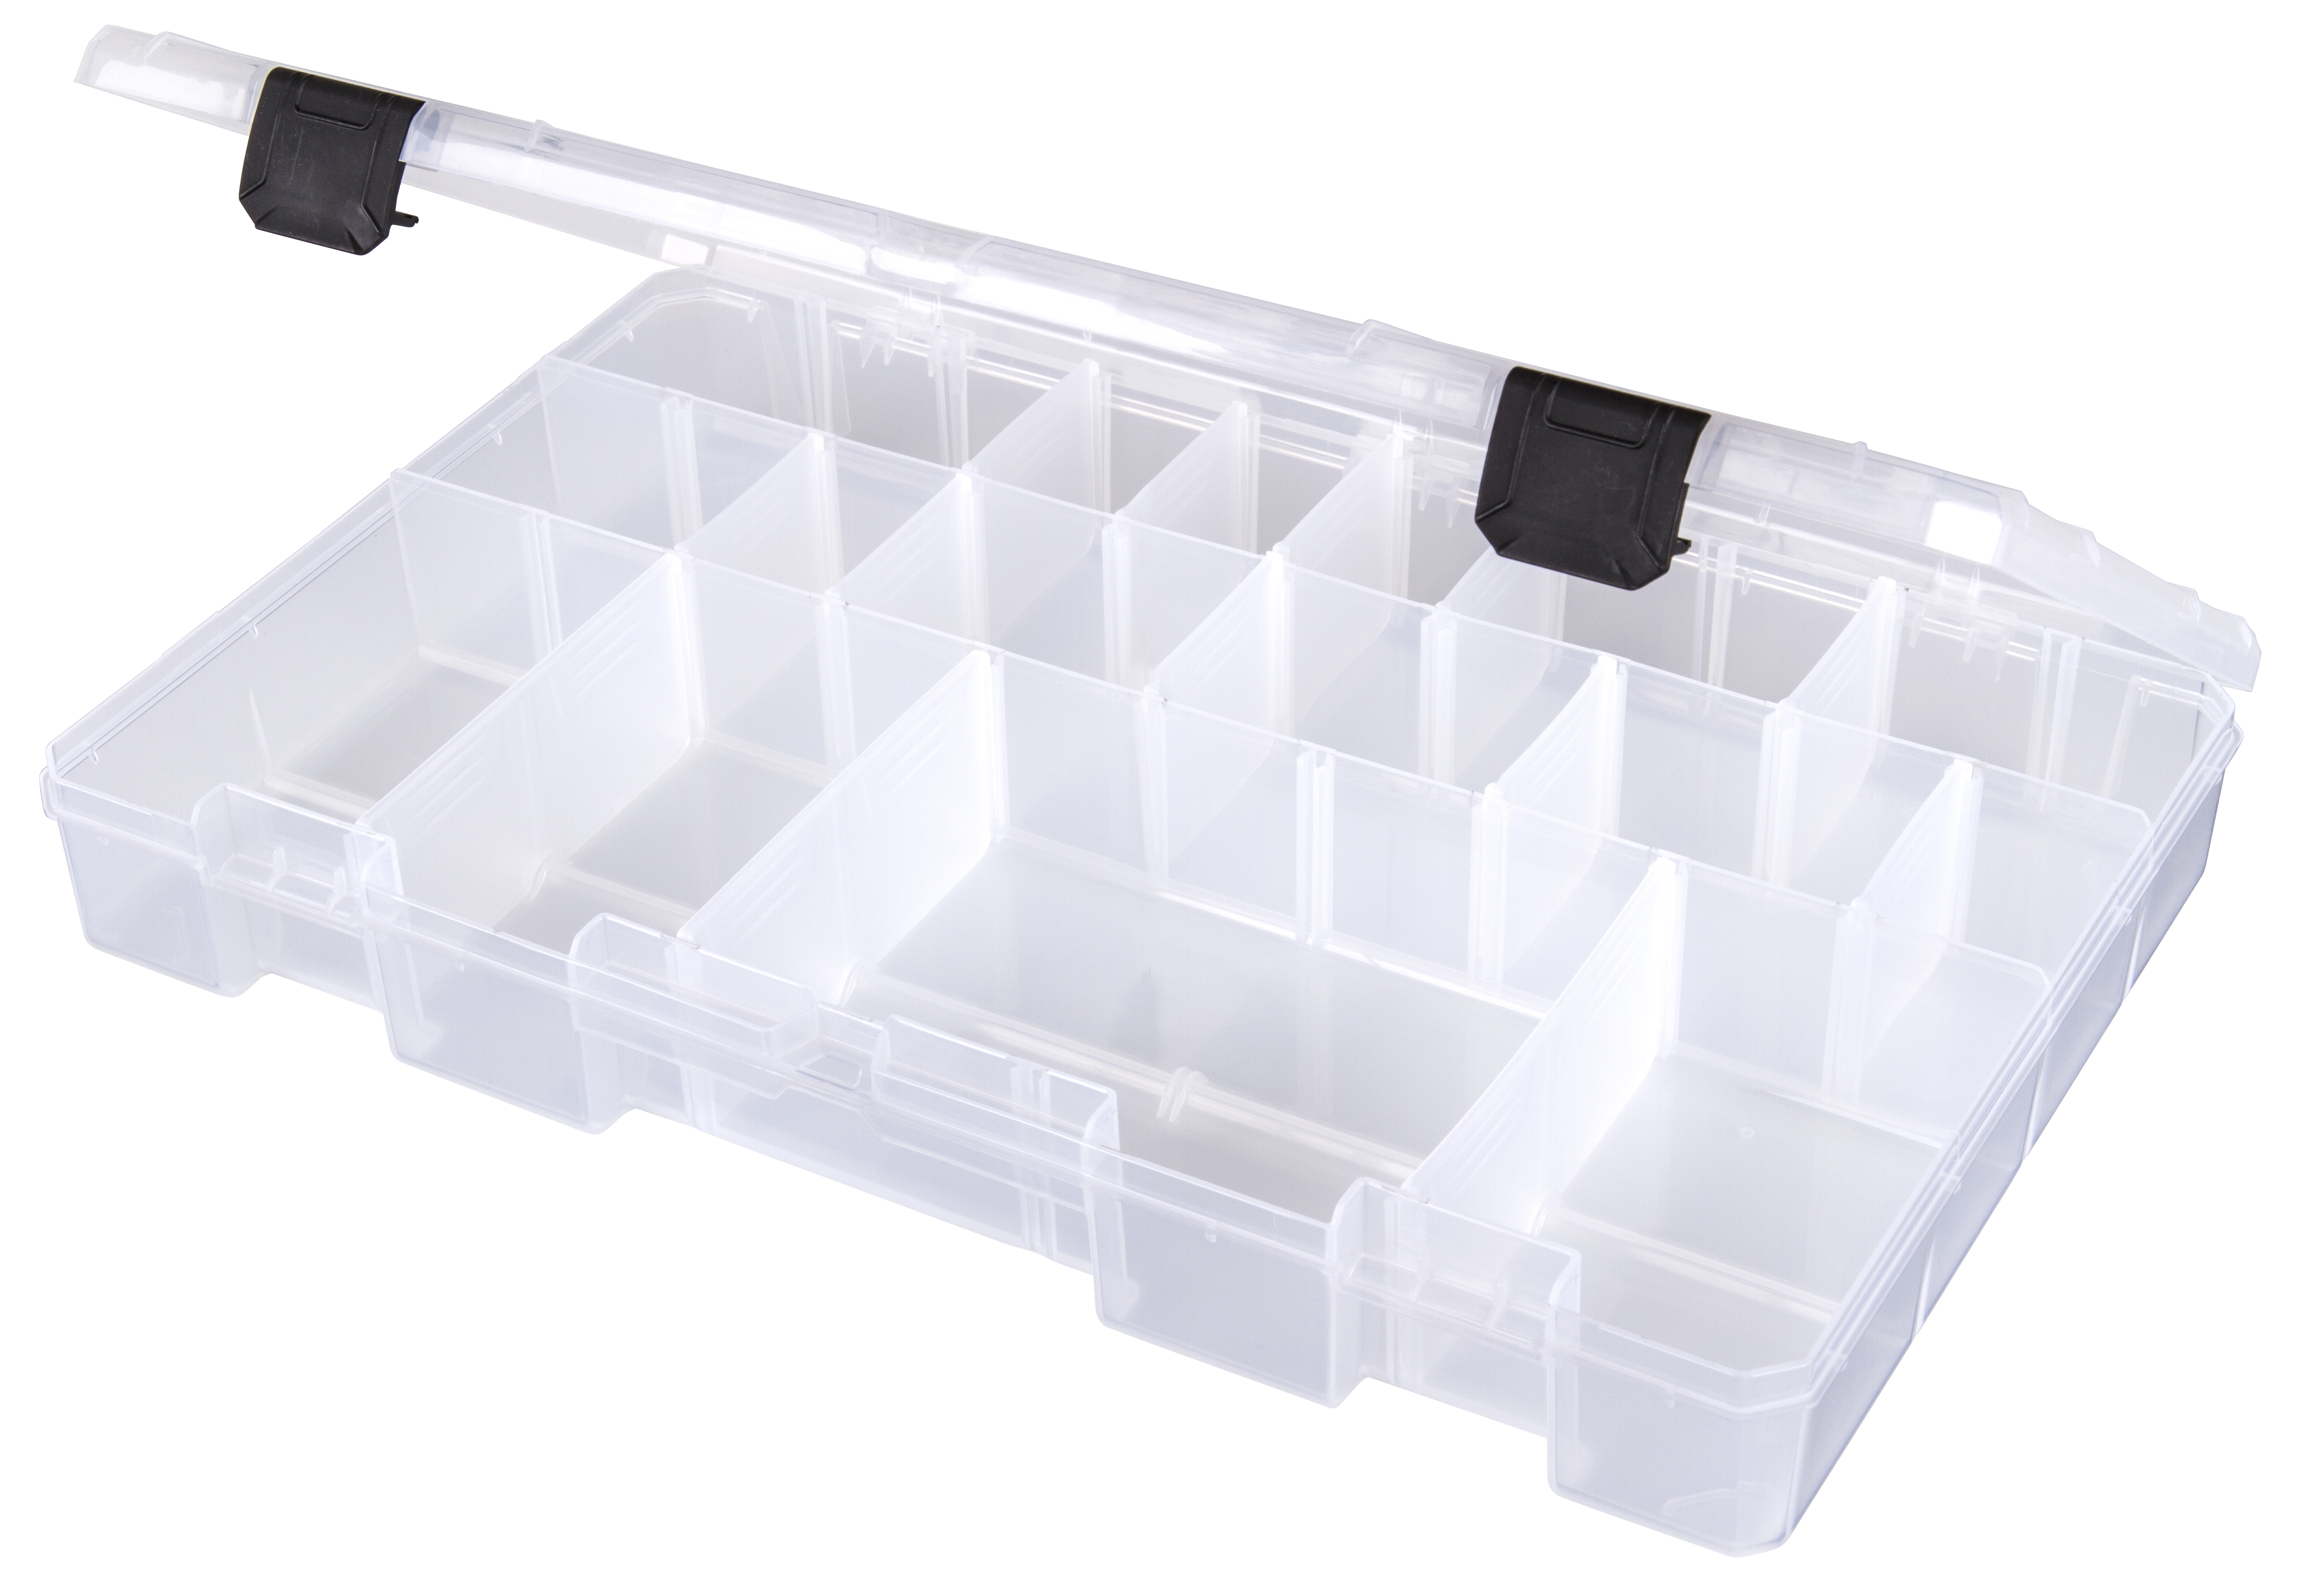 T5003 Three- to 25-Compartment Box (mech latch)